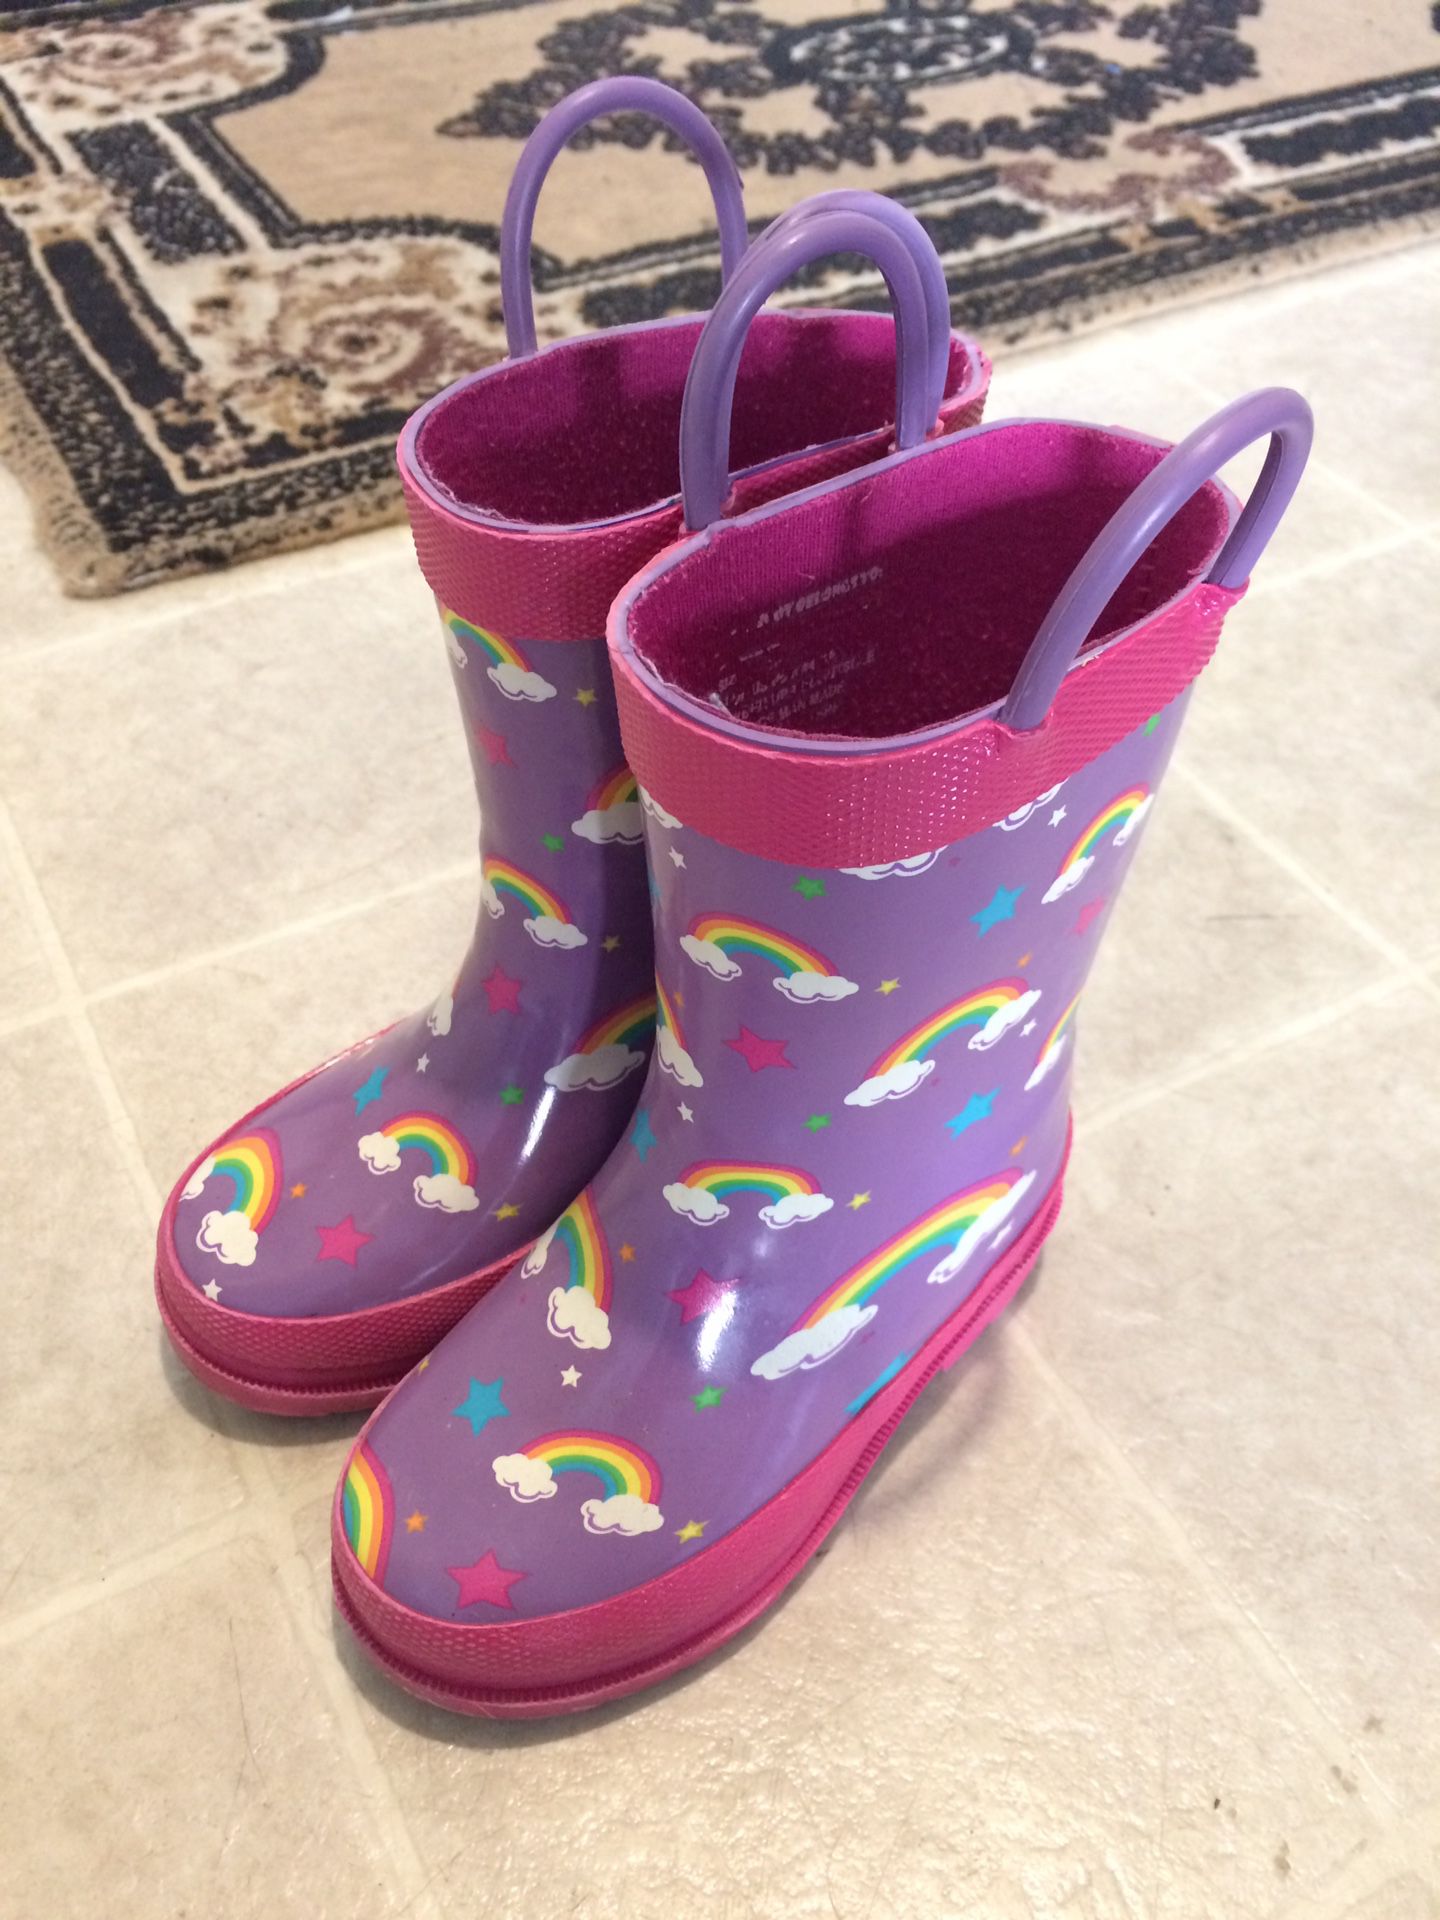 Toddler rain boots size 7/8